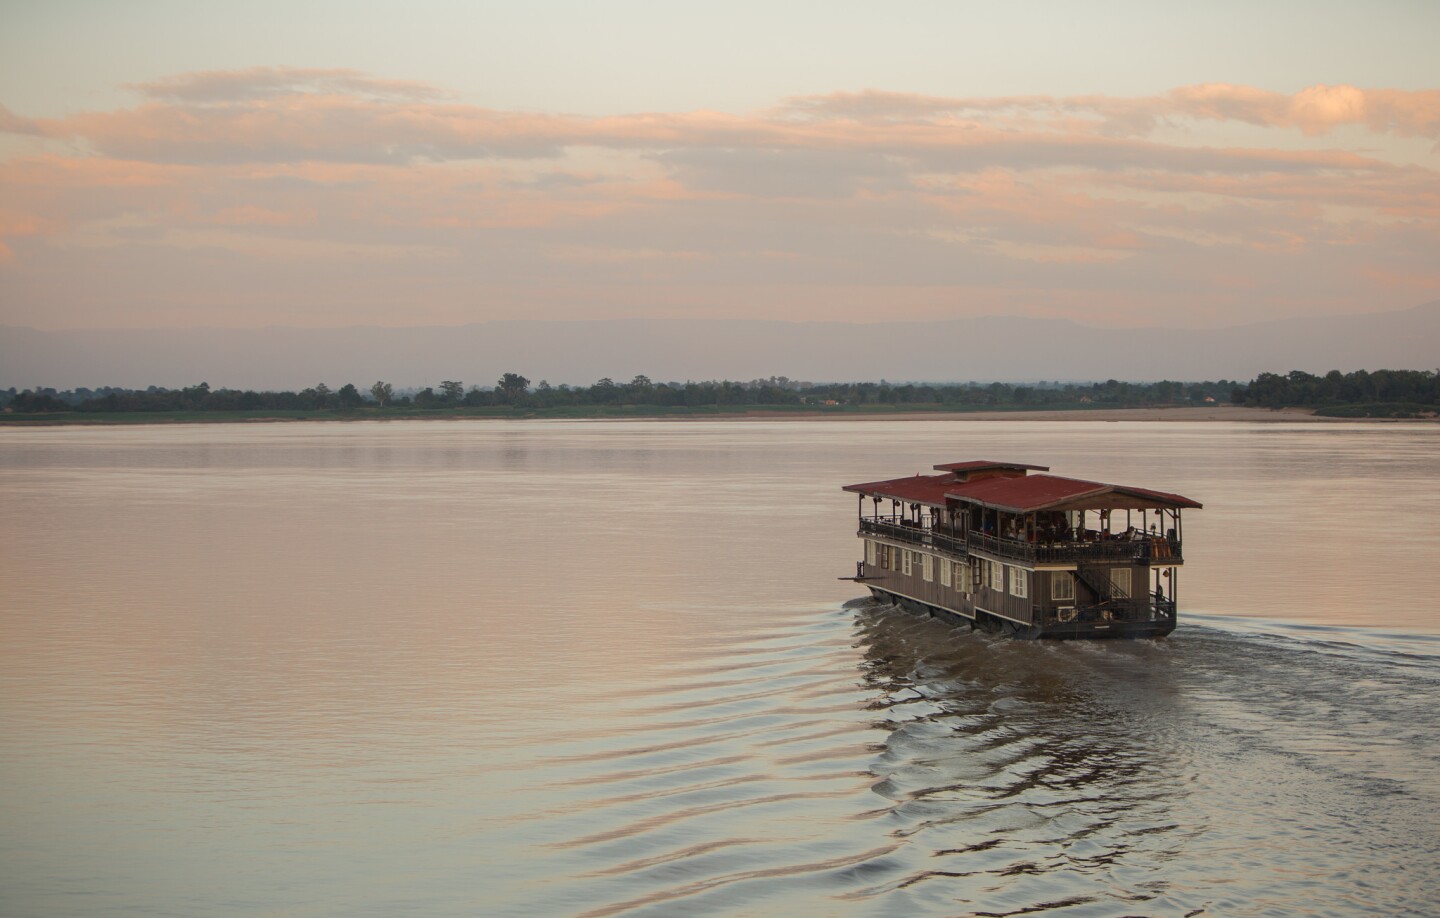 The Vat Phou boat, a floating hotel cruising on the Mekong river in southern Laos